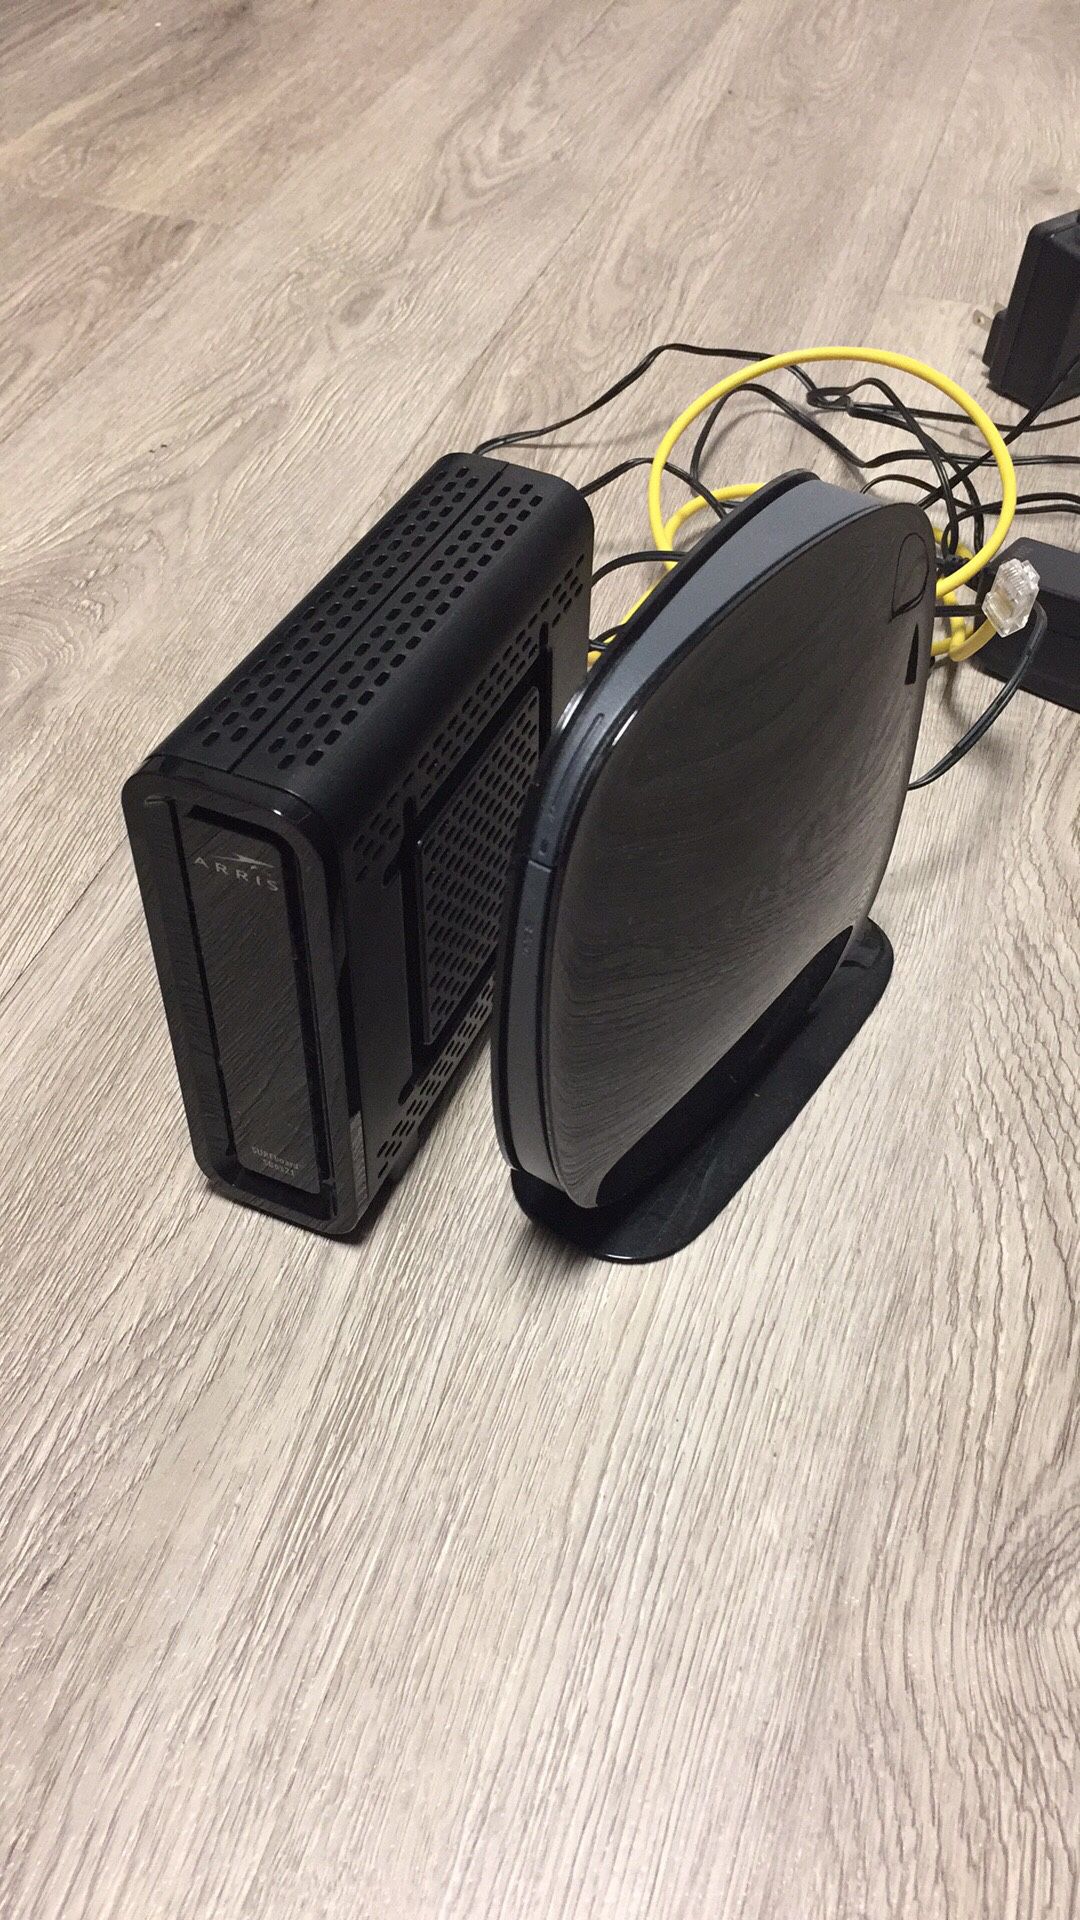 Modem and router